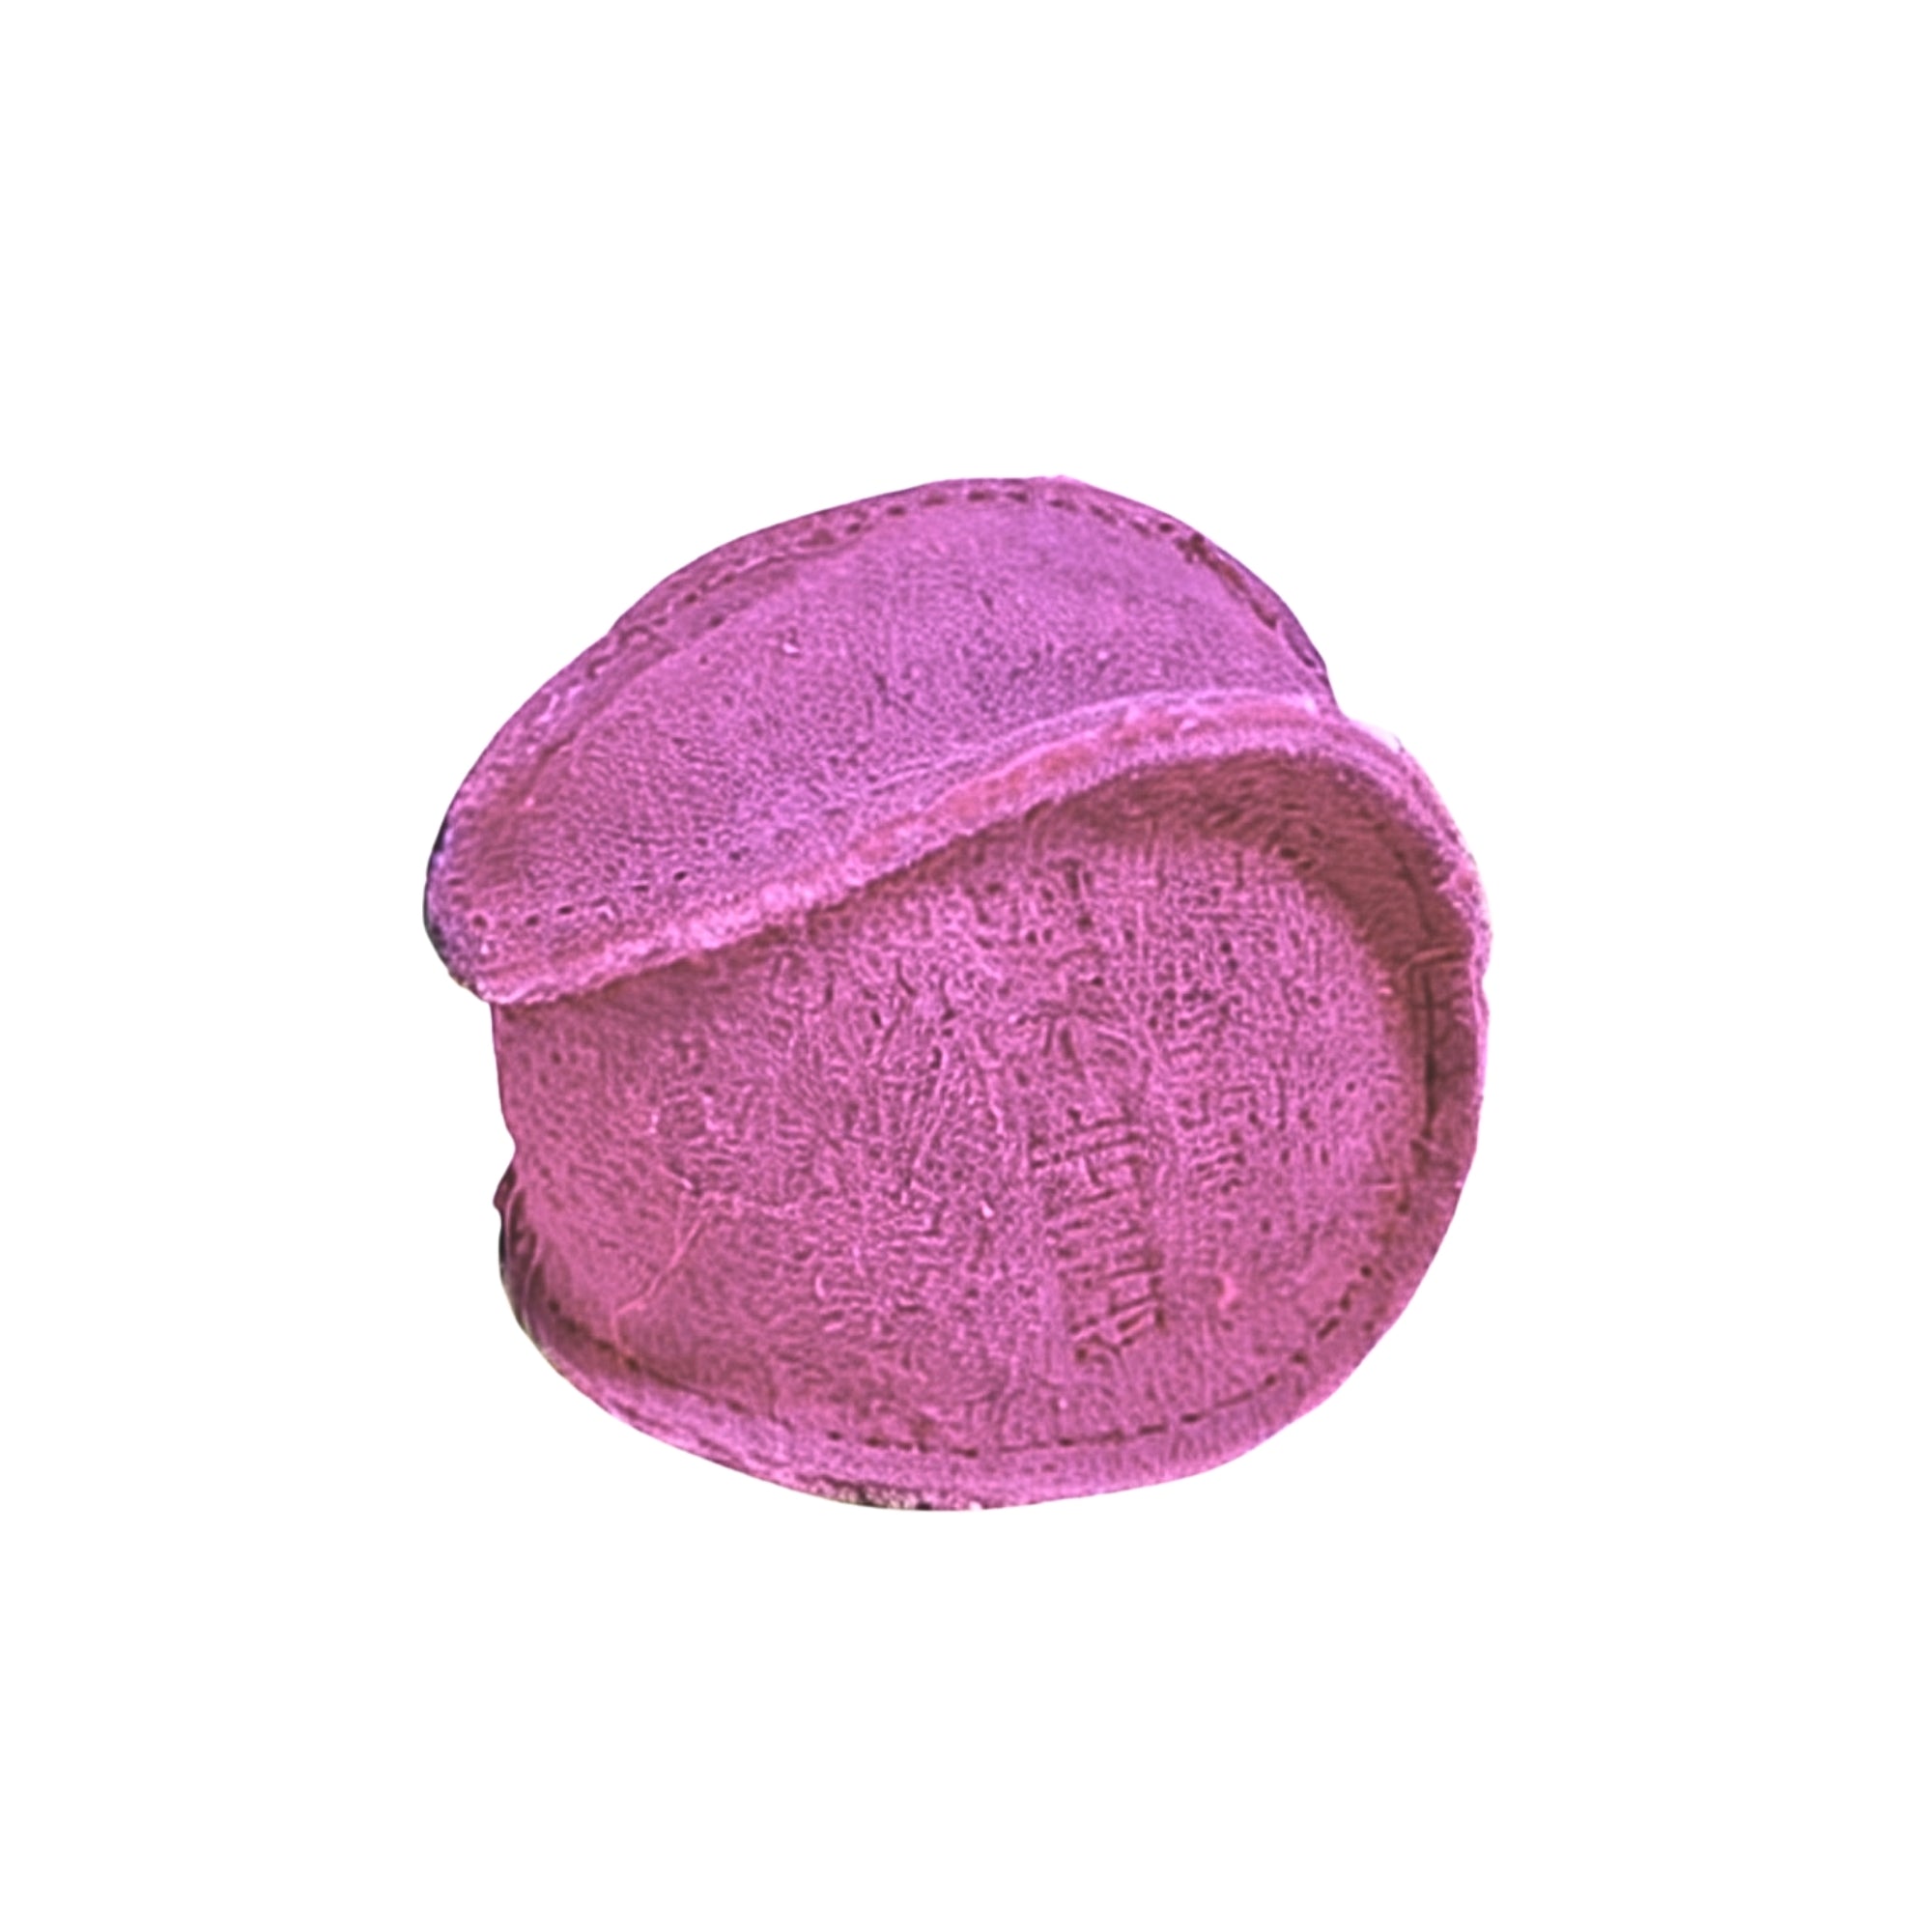 A vibrant pink Ball - Hot Pink kippah with a textured fabric surface and raised seams, featuring embroidered Hebrew text on the inside, crafted from eco-friendly coconut fibre by Georgie Paws.